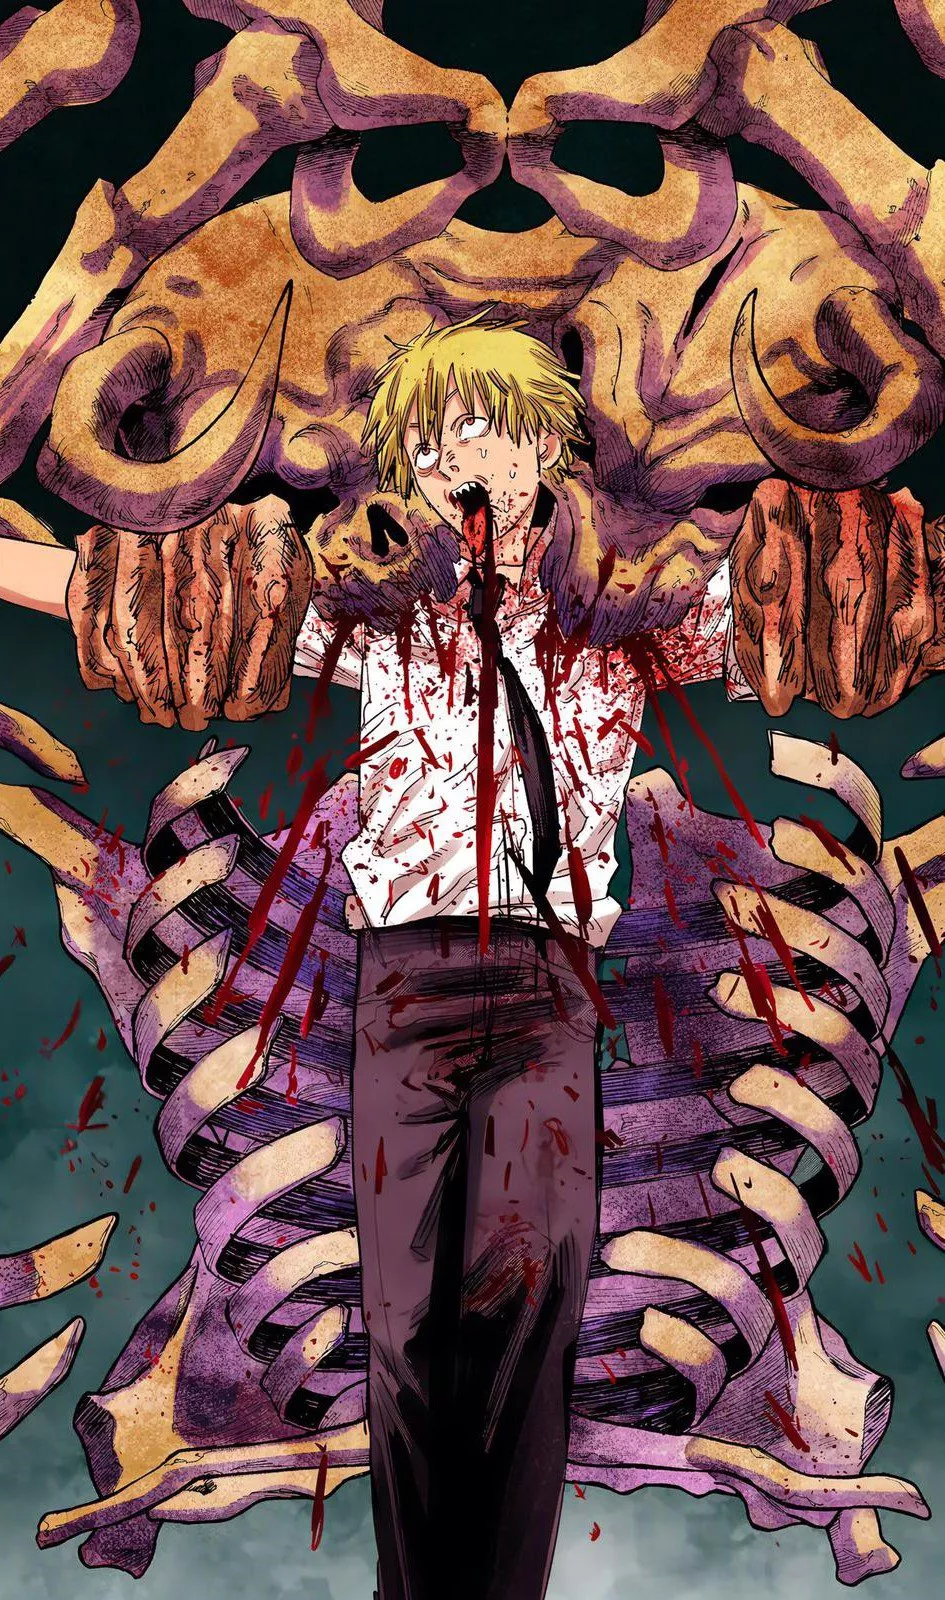 The Cursed Devil - one of the strongest devils in chainsaw man